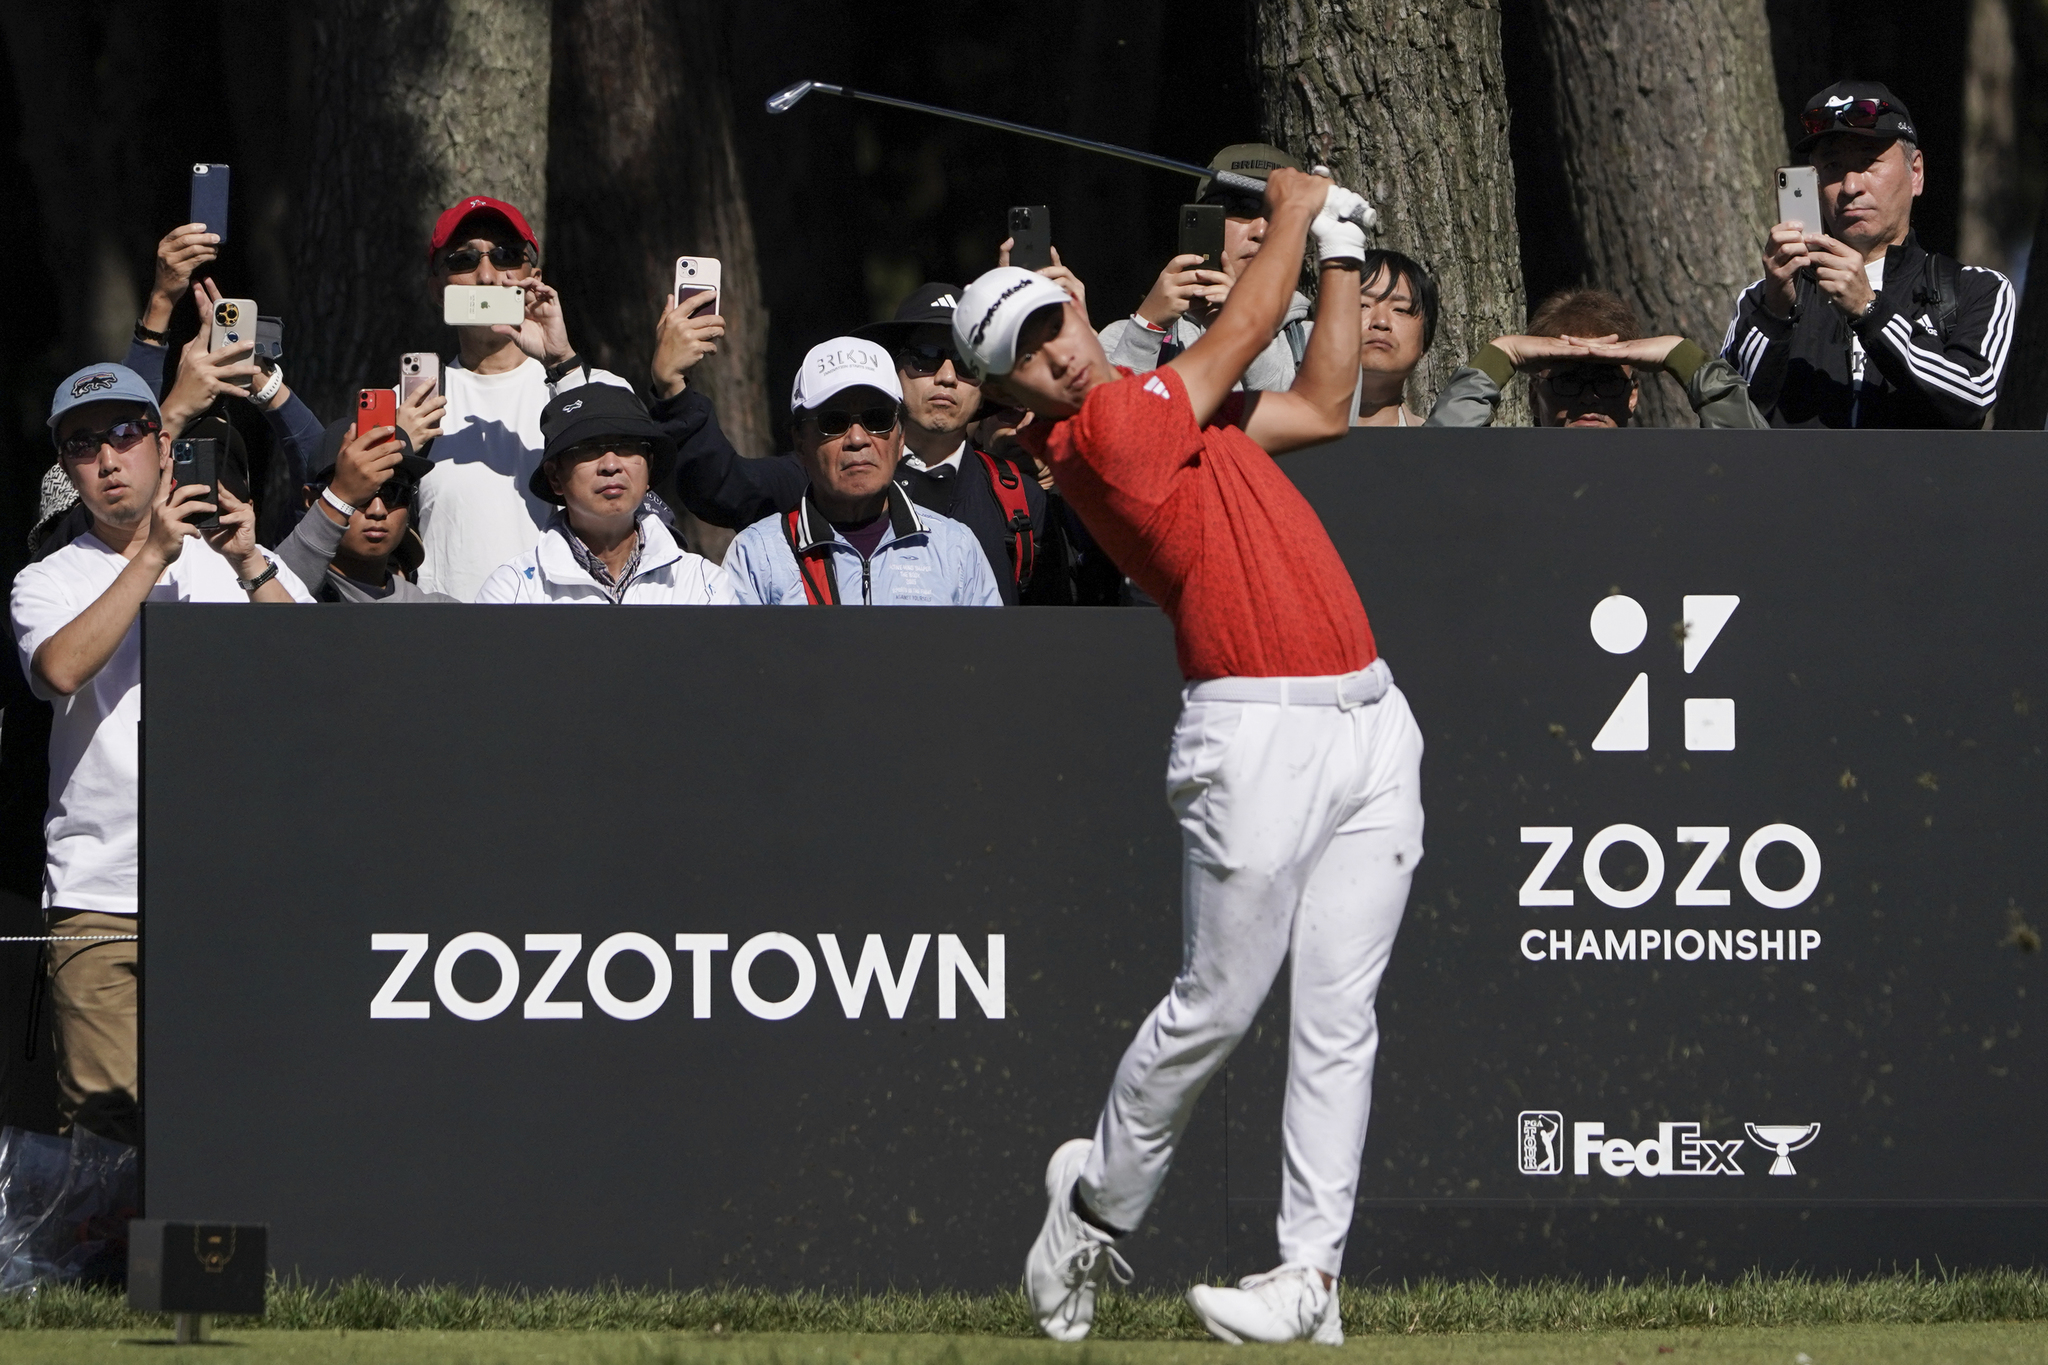 Collin Morikawa of the United States hits his tee shot on the second hole in the final round of the PGA Tour Zozo Championship